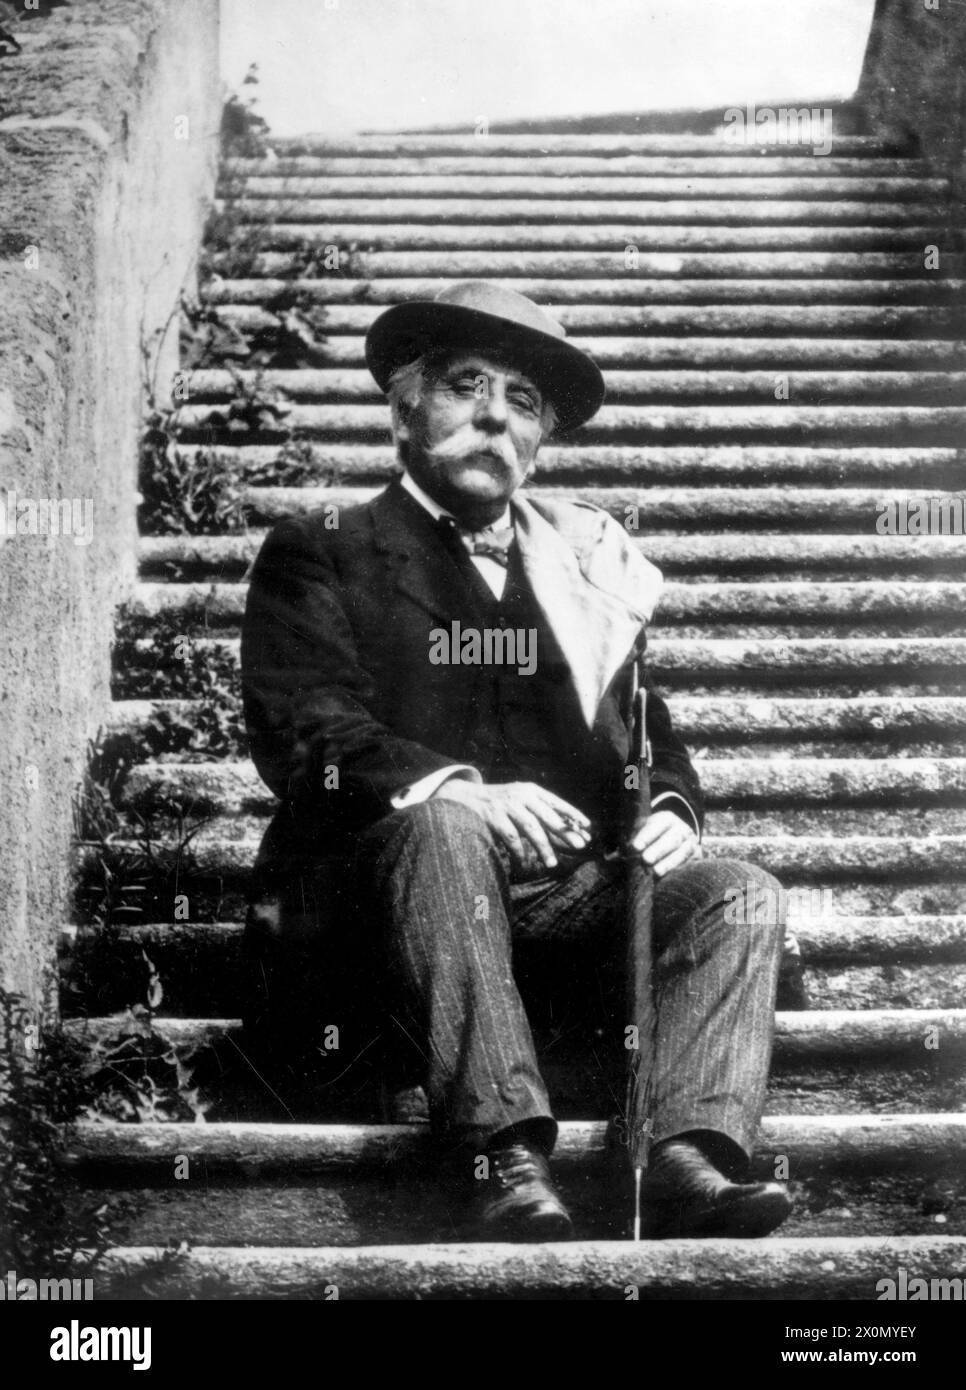 Gabriel Fauré seated on a staircase, cigarette in hand Stock Photo